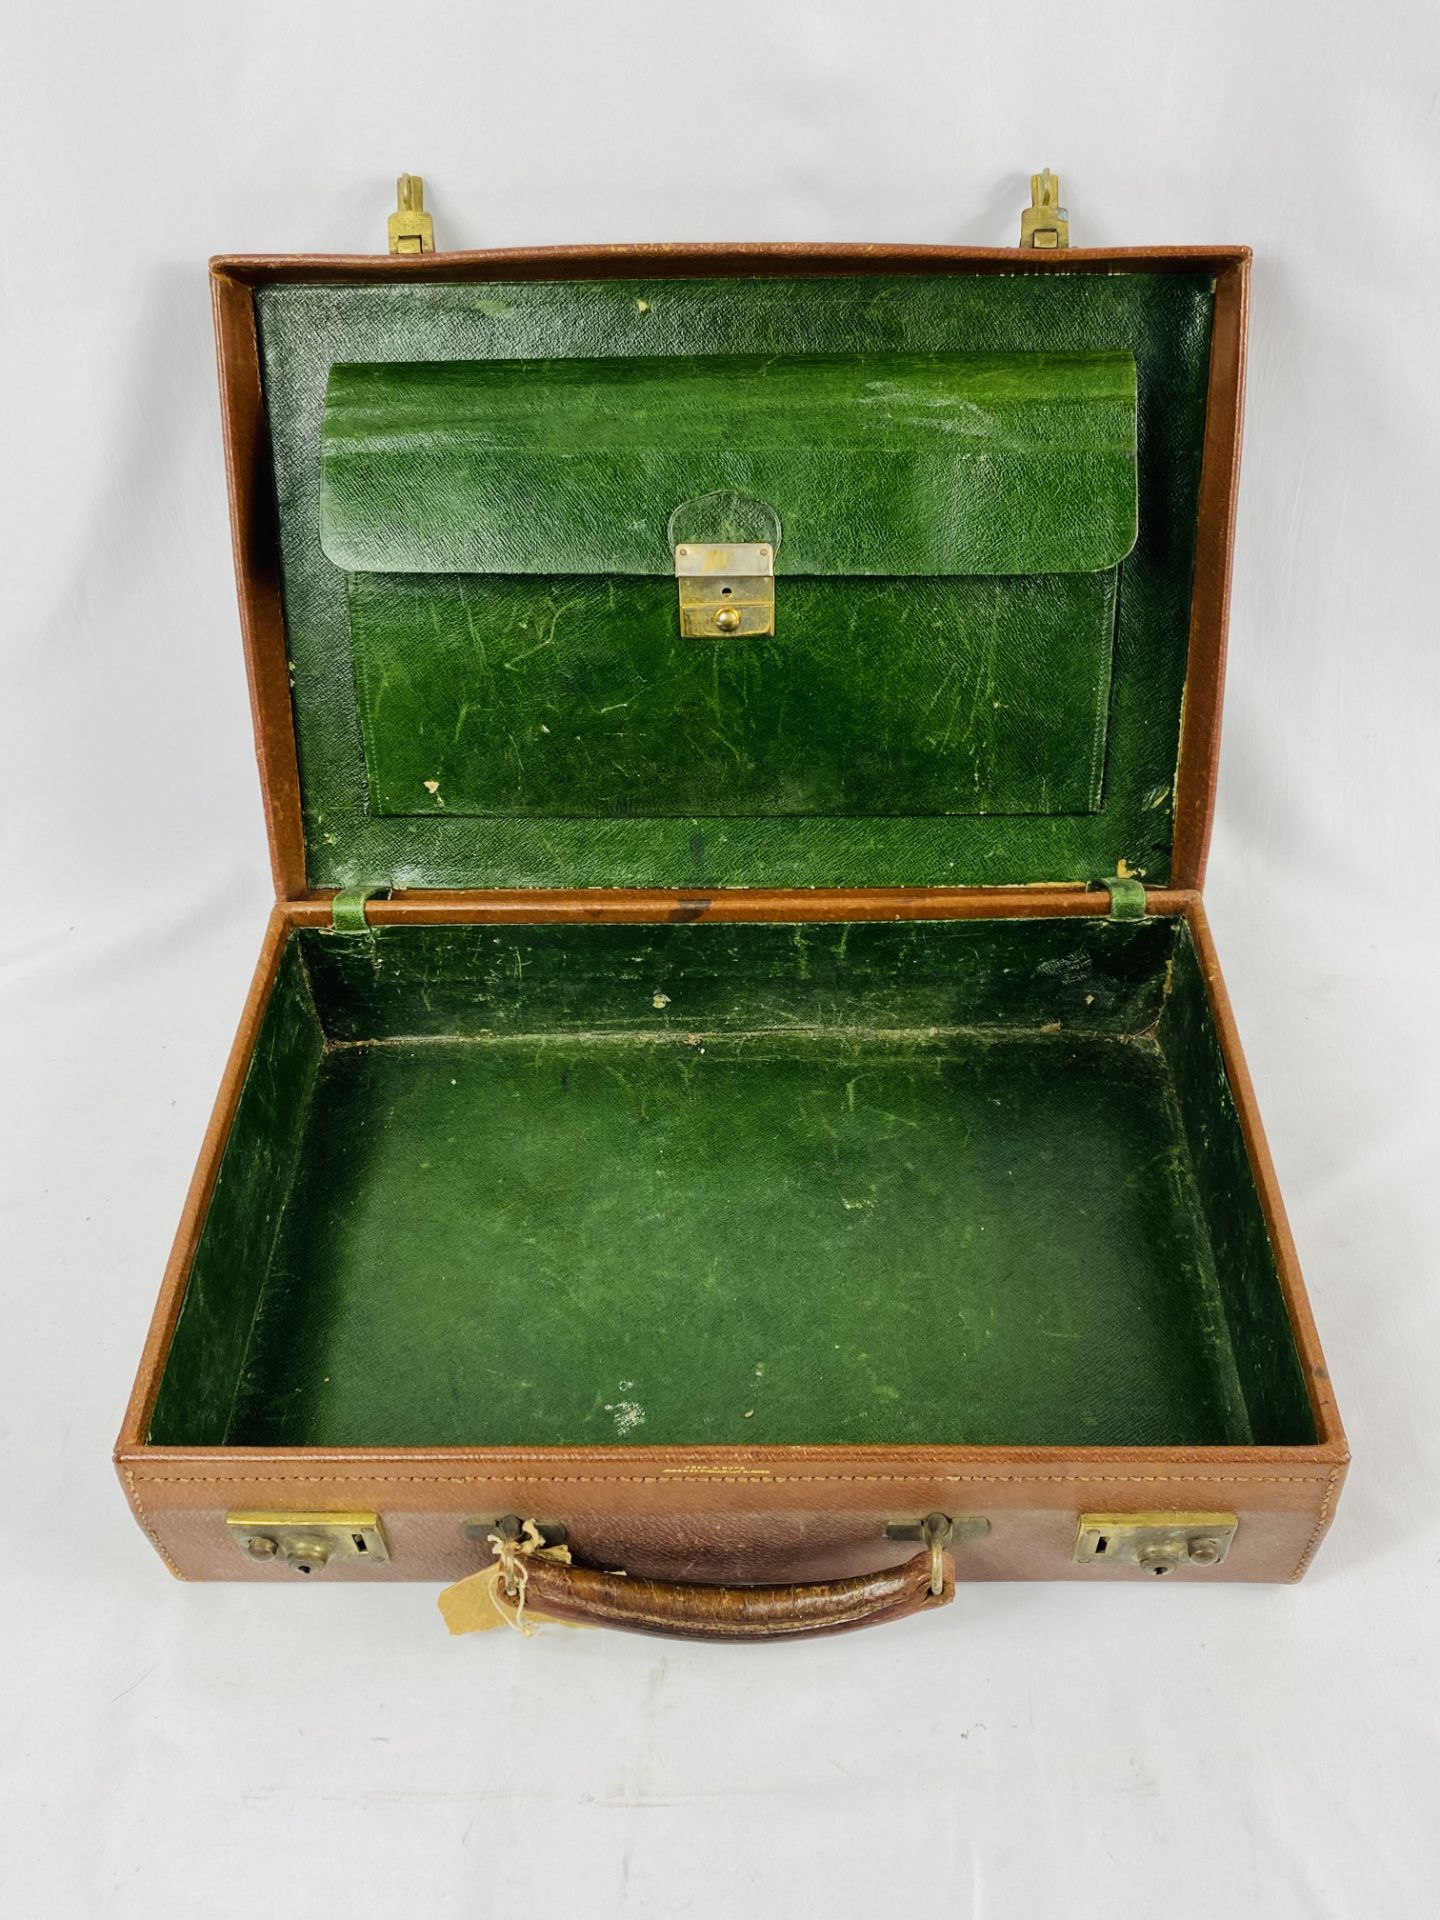 Drew & Sons pig skin attache case - Image 5 of 6